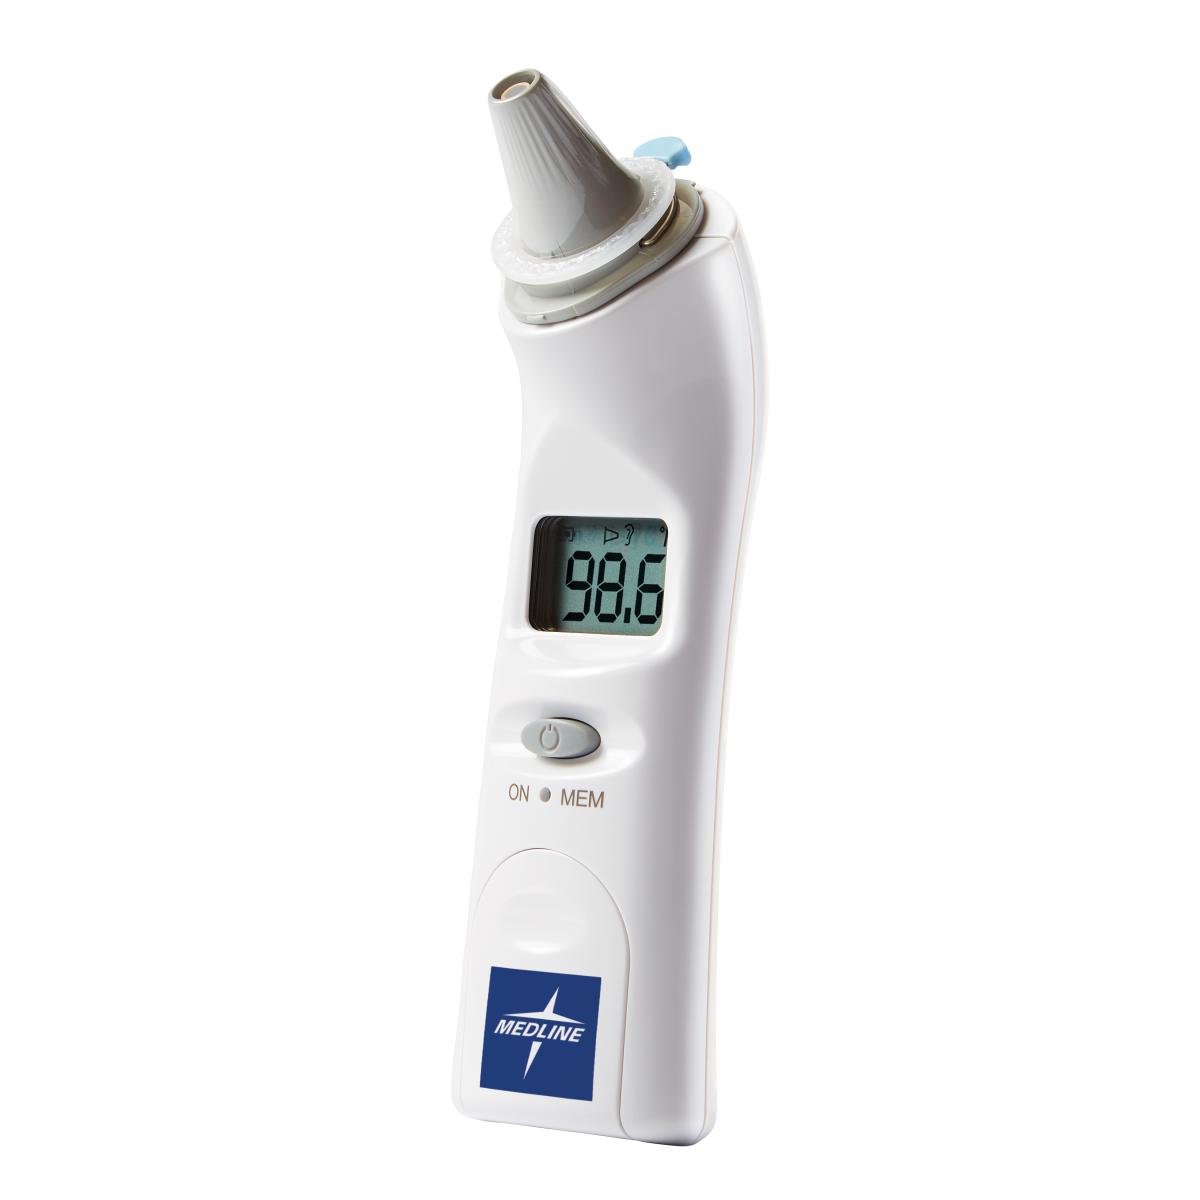 Life Source Ear Thermometer